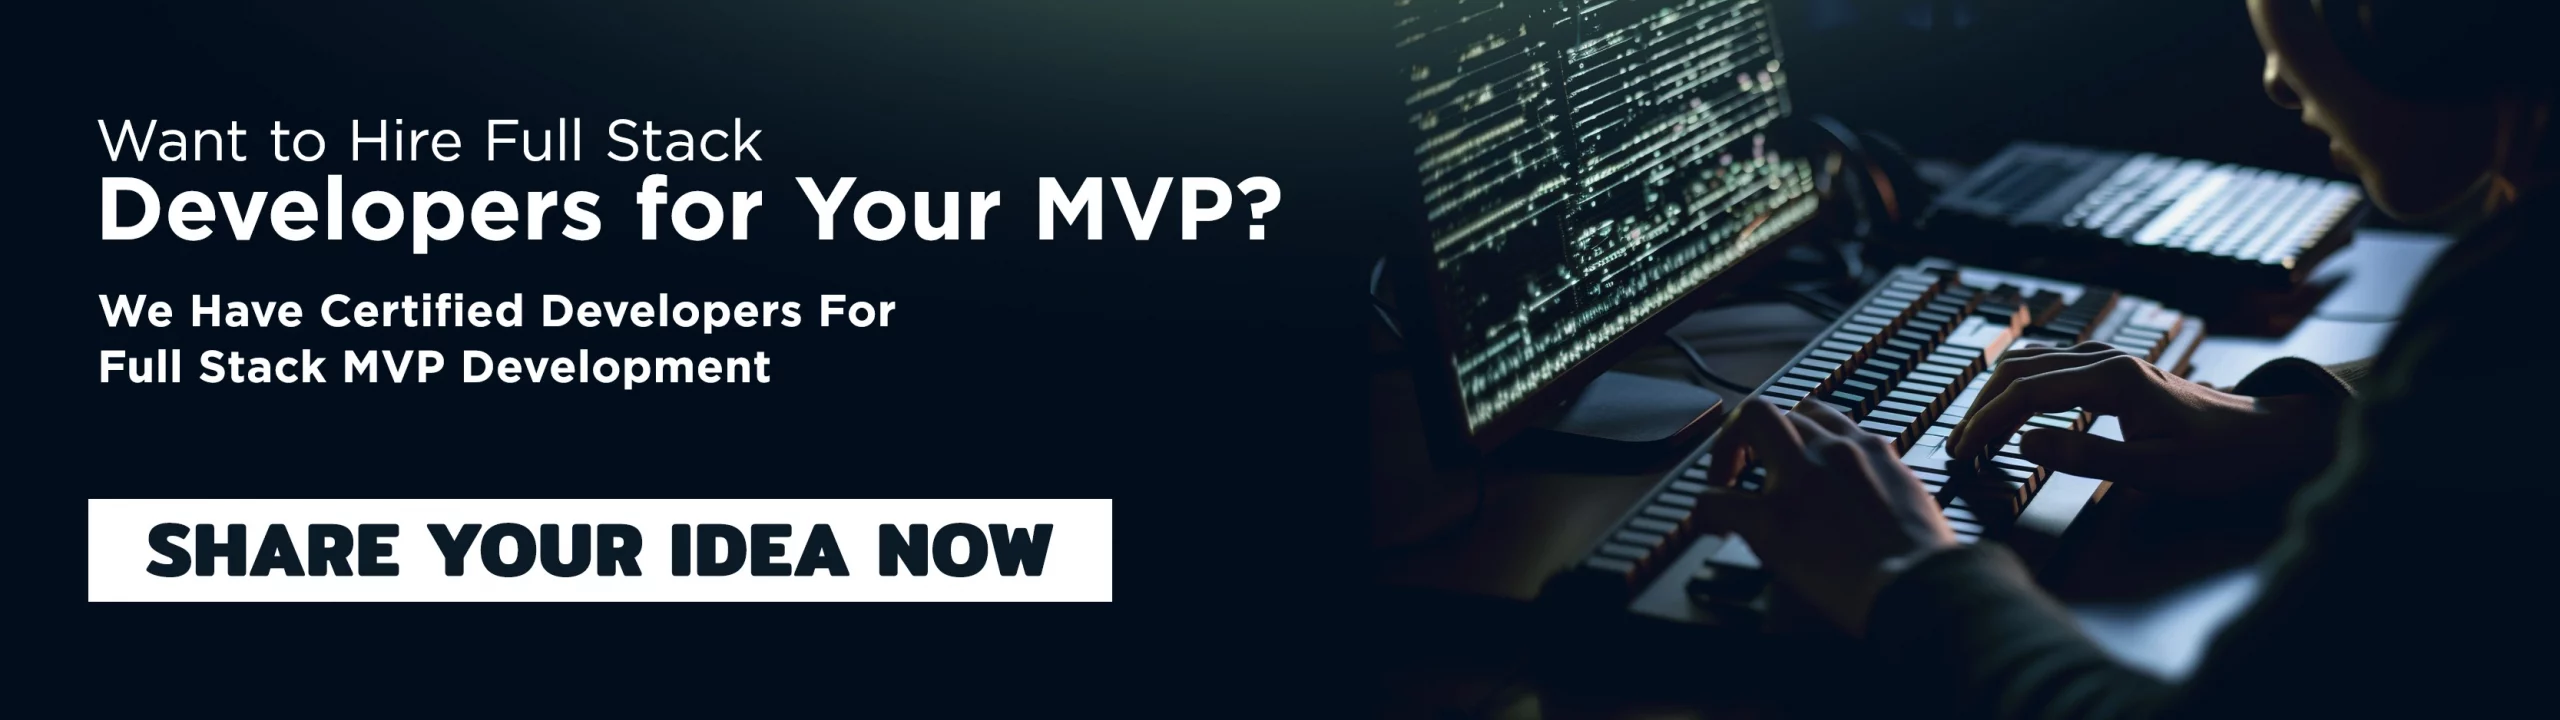 Contact Us to Hire Full Stack Developers for Your MVP